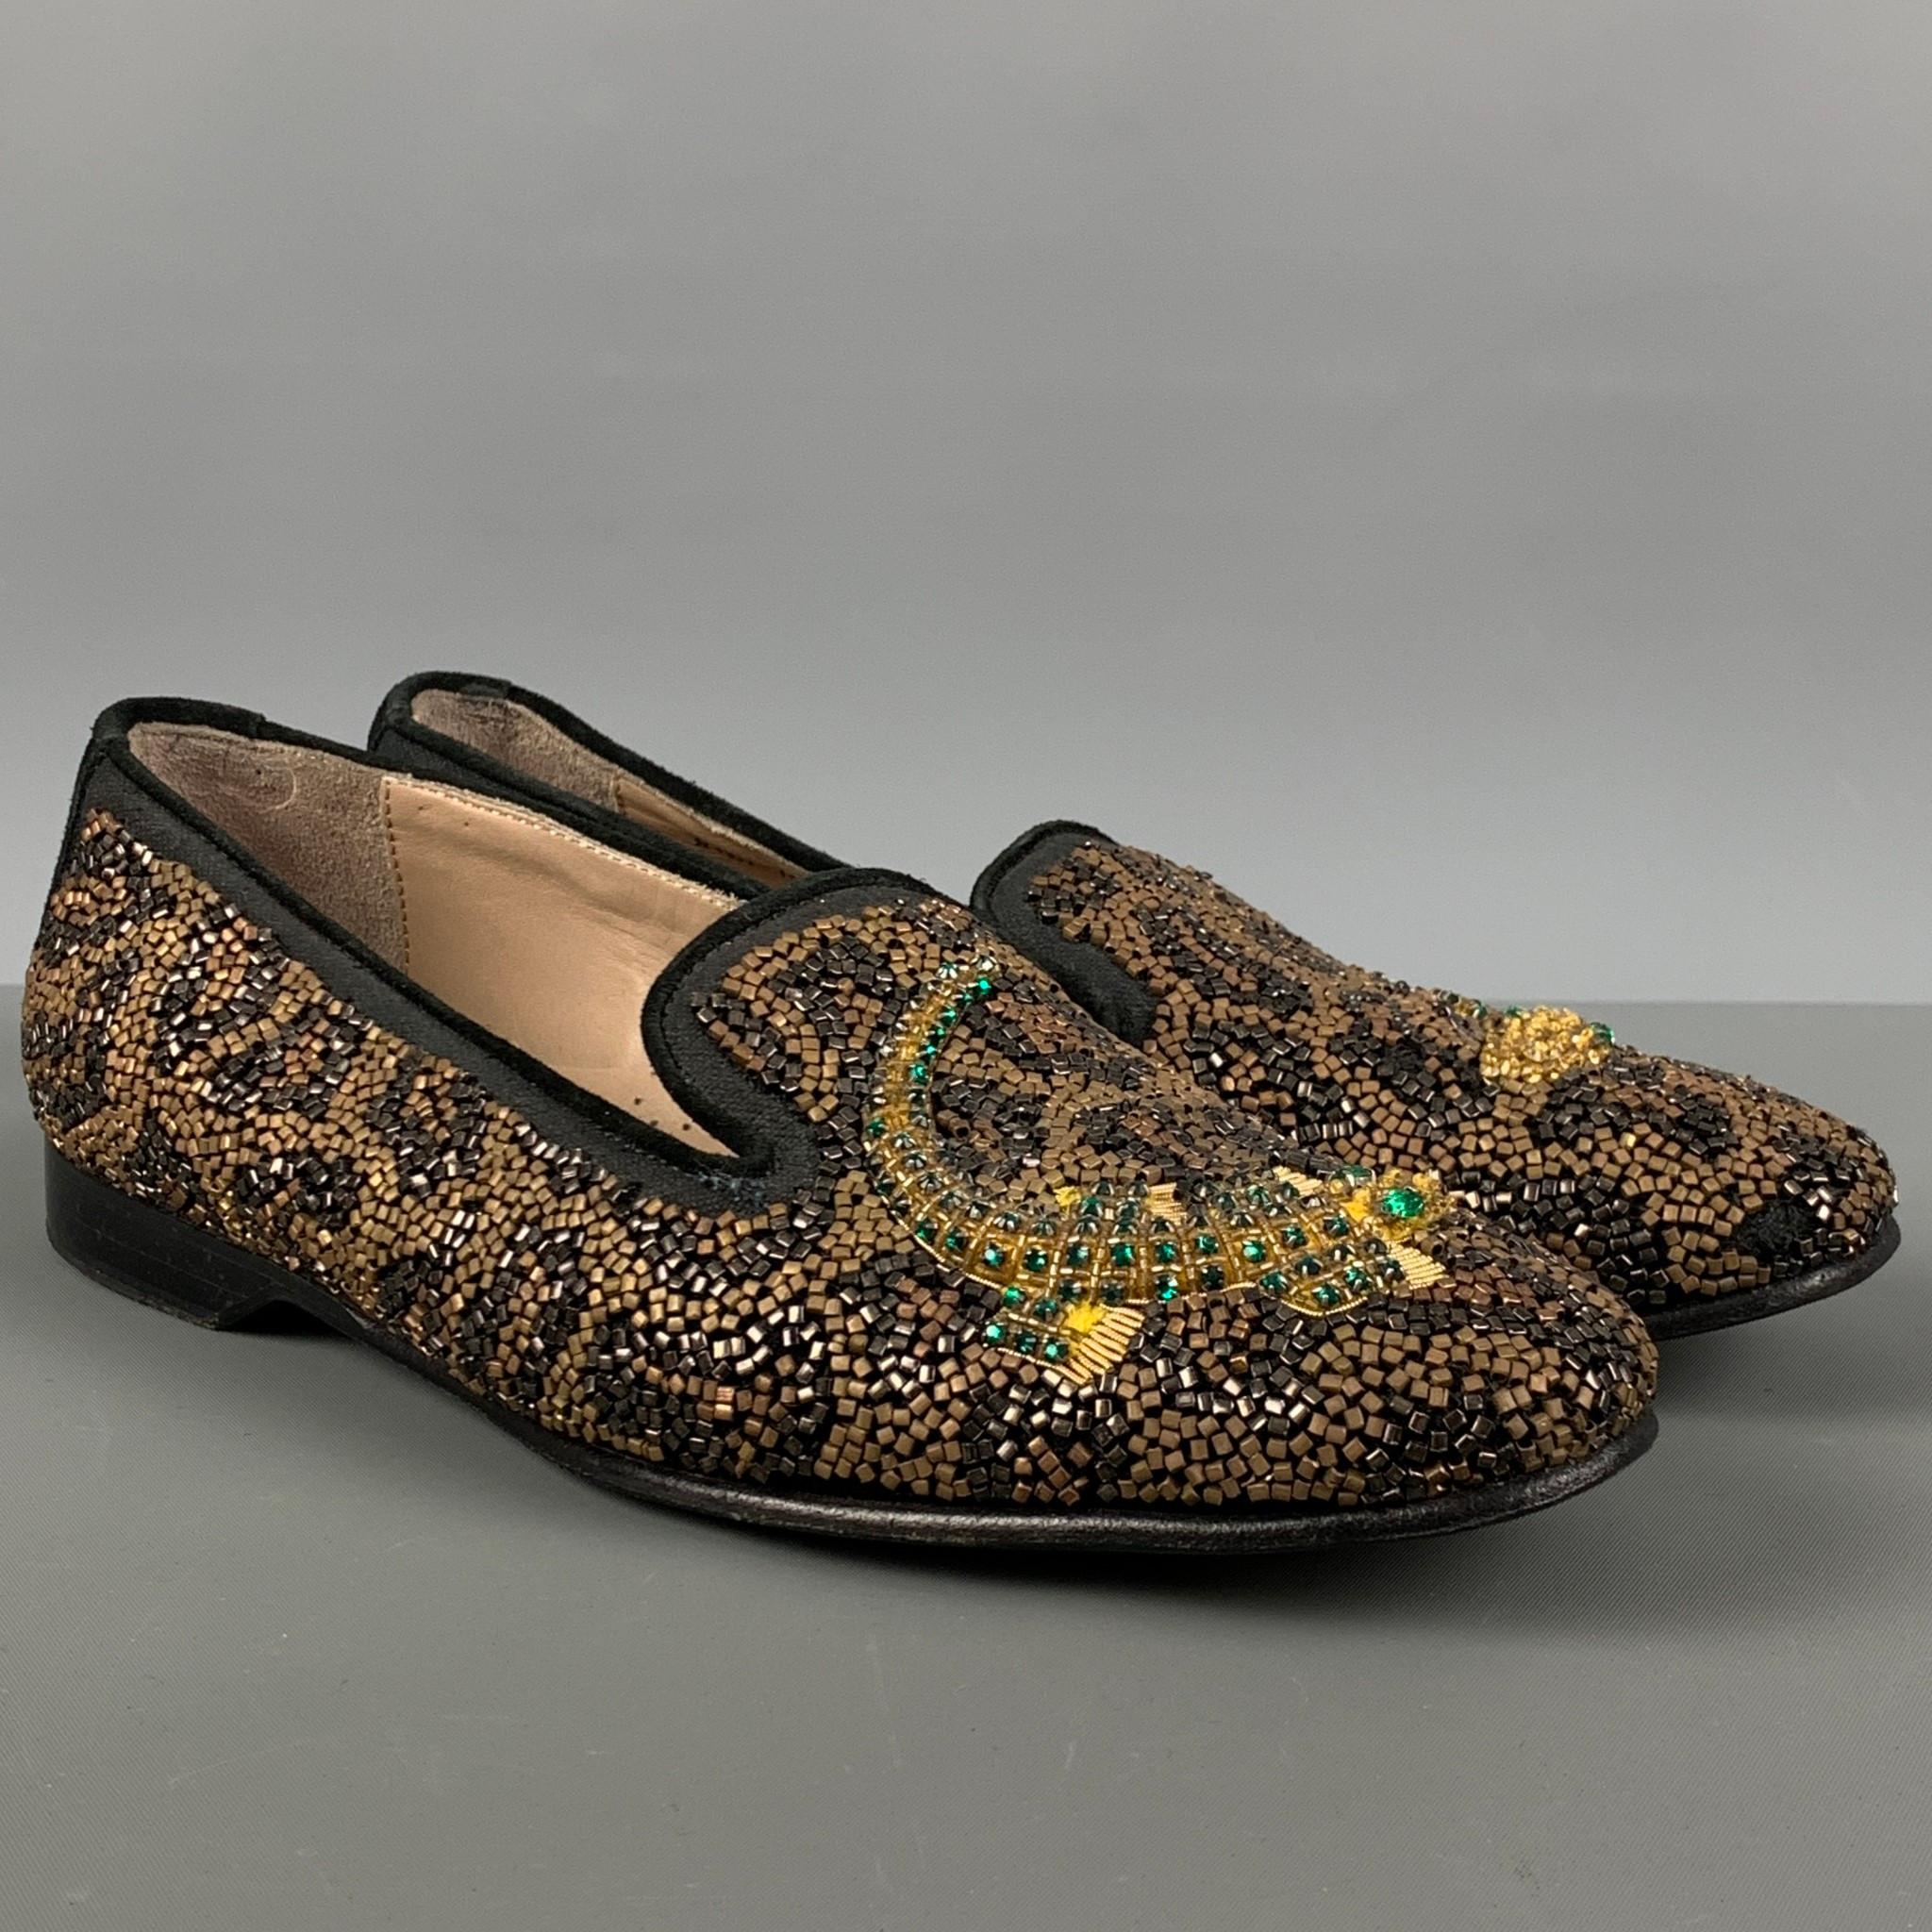 DONALD J PLINER SIGNATURE loafers comes in a black & gold beaded leather featuring a beaded crocodile design, slip on style, and a square toe. Made in Italy.

Very Good Pre-Owned Condition.
Marked: 8 1/2  M

Outsole: 11 in. x 3.5 in.  

SKU: